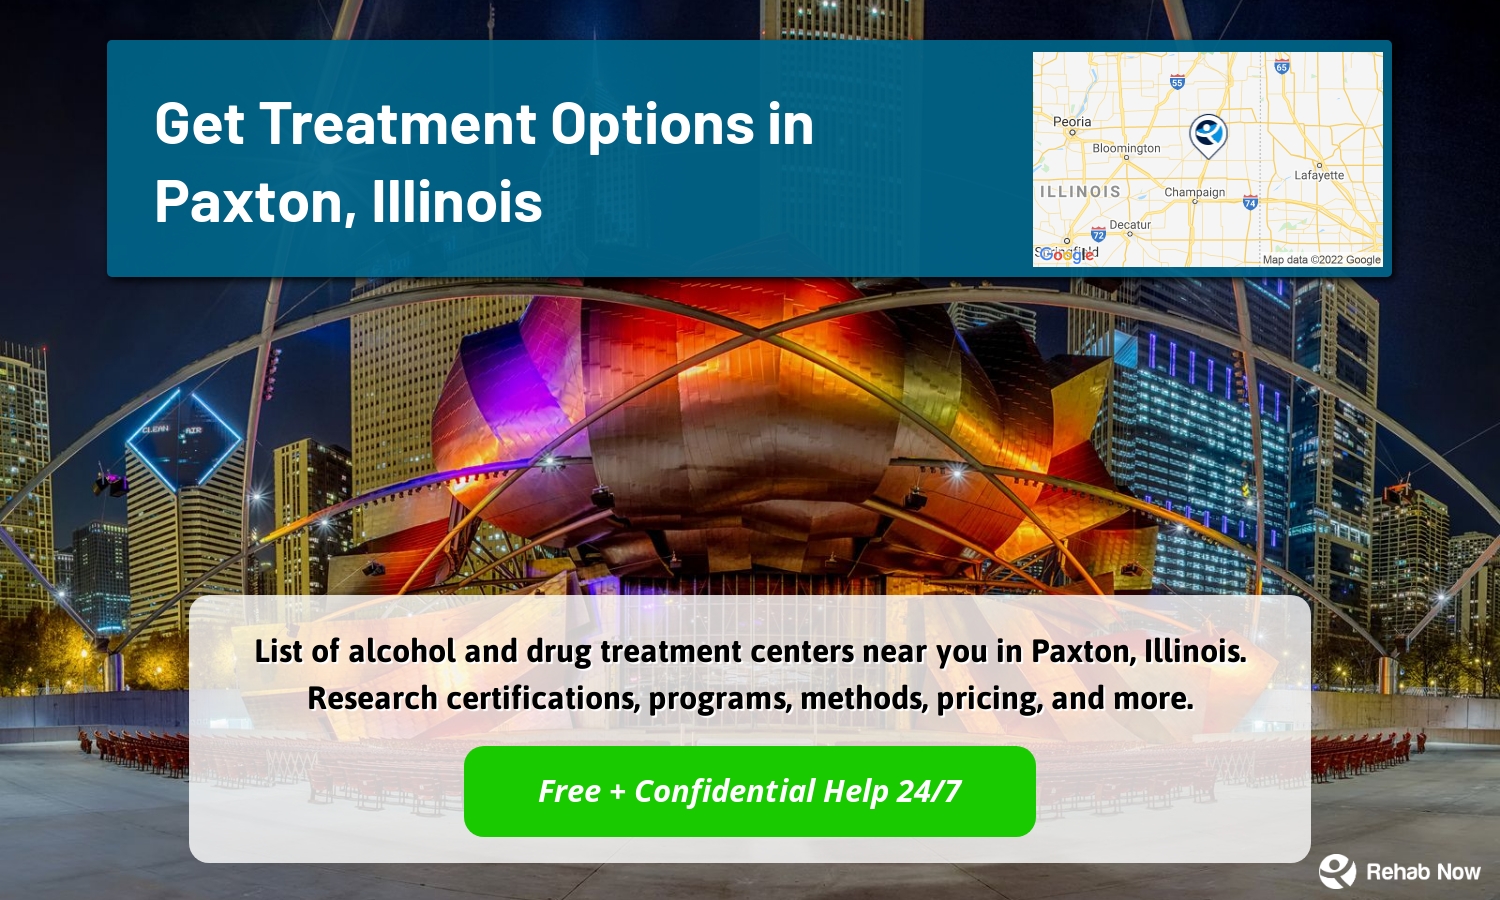 List of alcohol and drug treatment centers near you in Paxton, Illinois. Research certifications, programs, methods, pricing, and more.